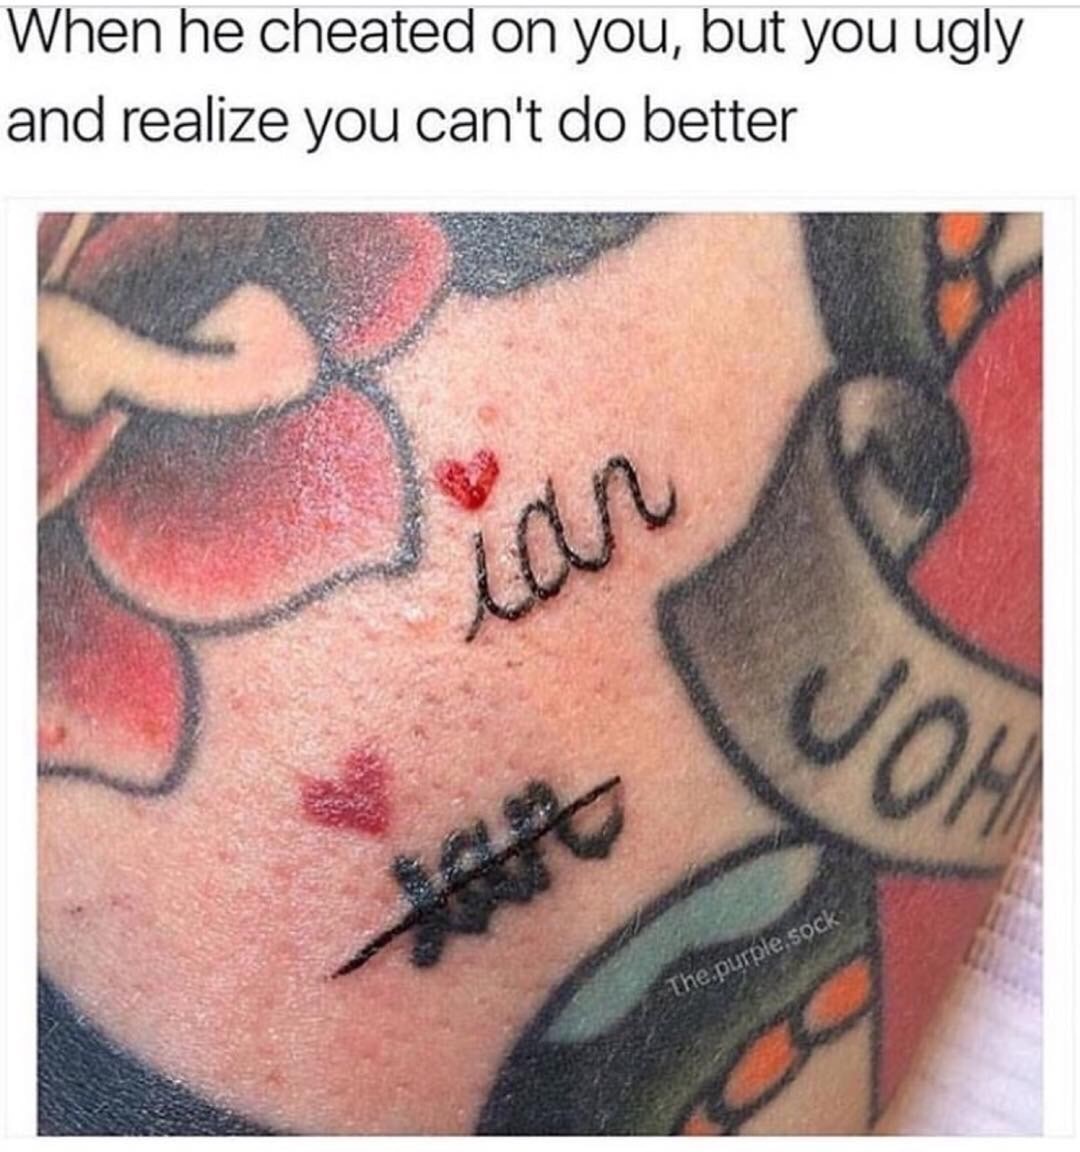 girl has tattoo of Ian, crosses it out, makes another.